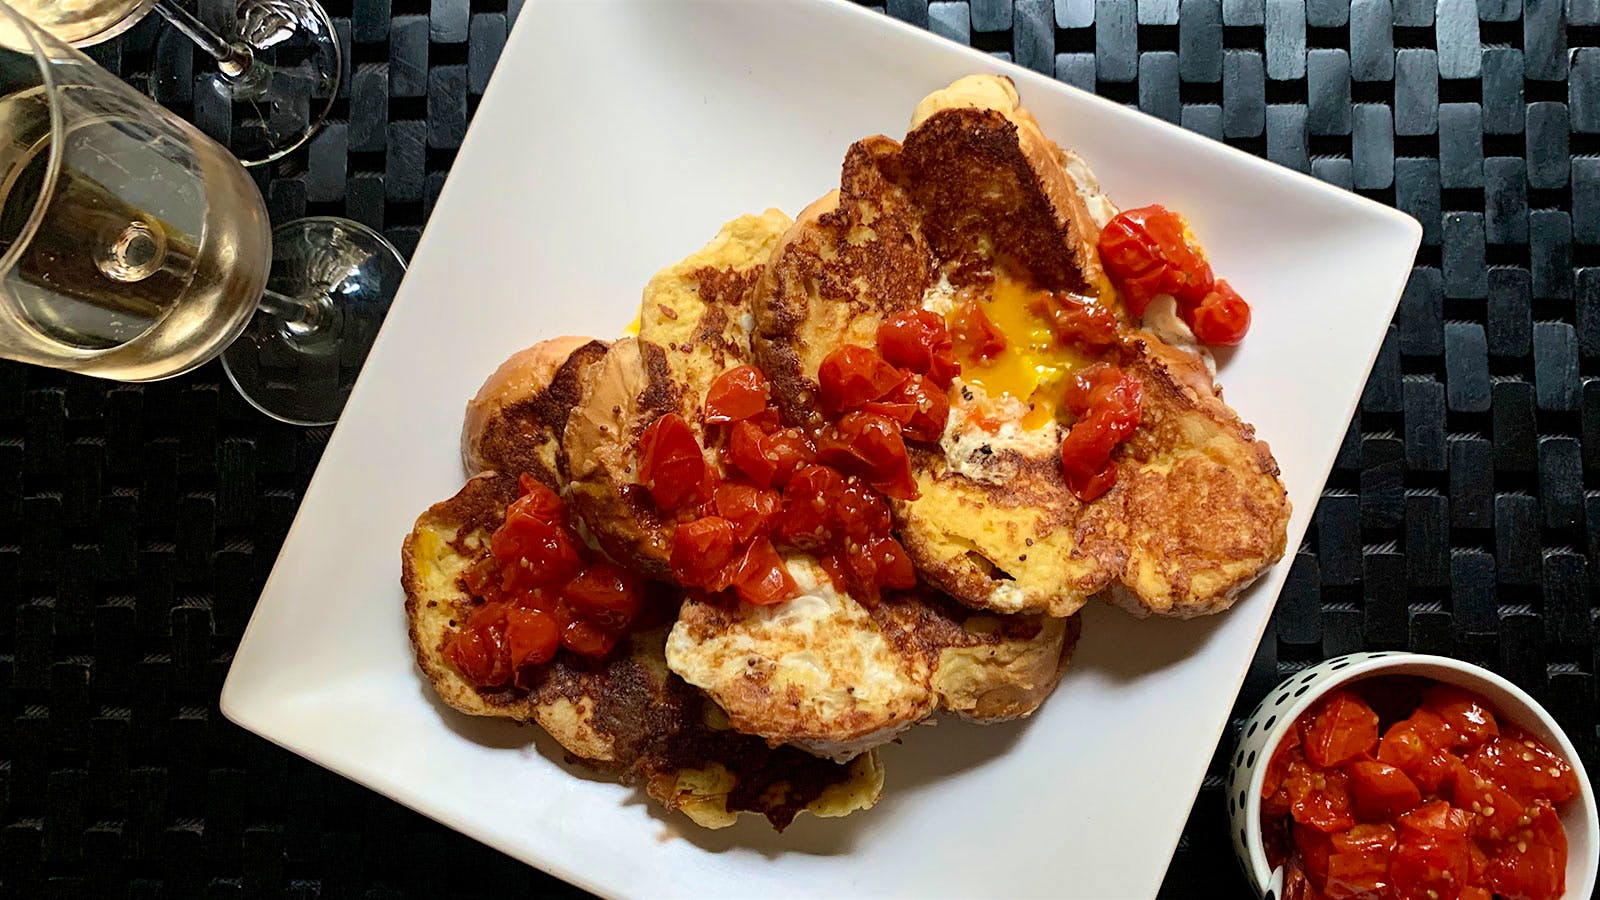 8 & $20: Savory French Toast with Quick Tomato Jam and Sparkling Wine